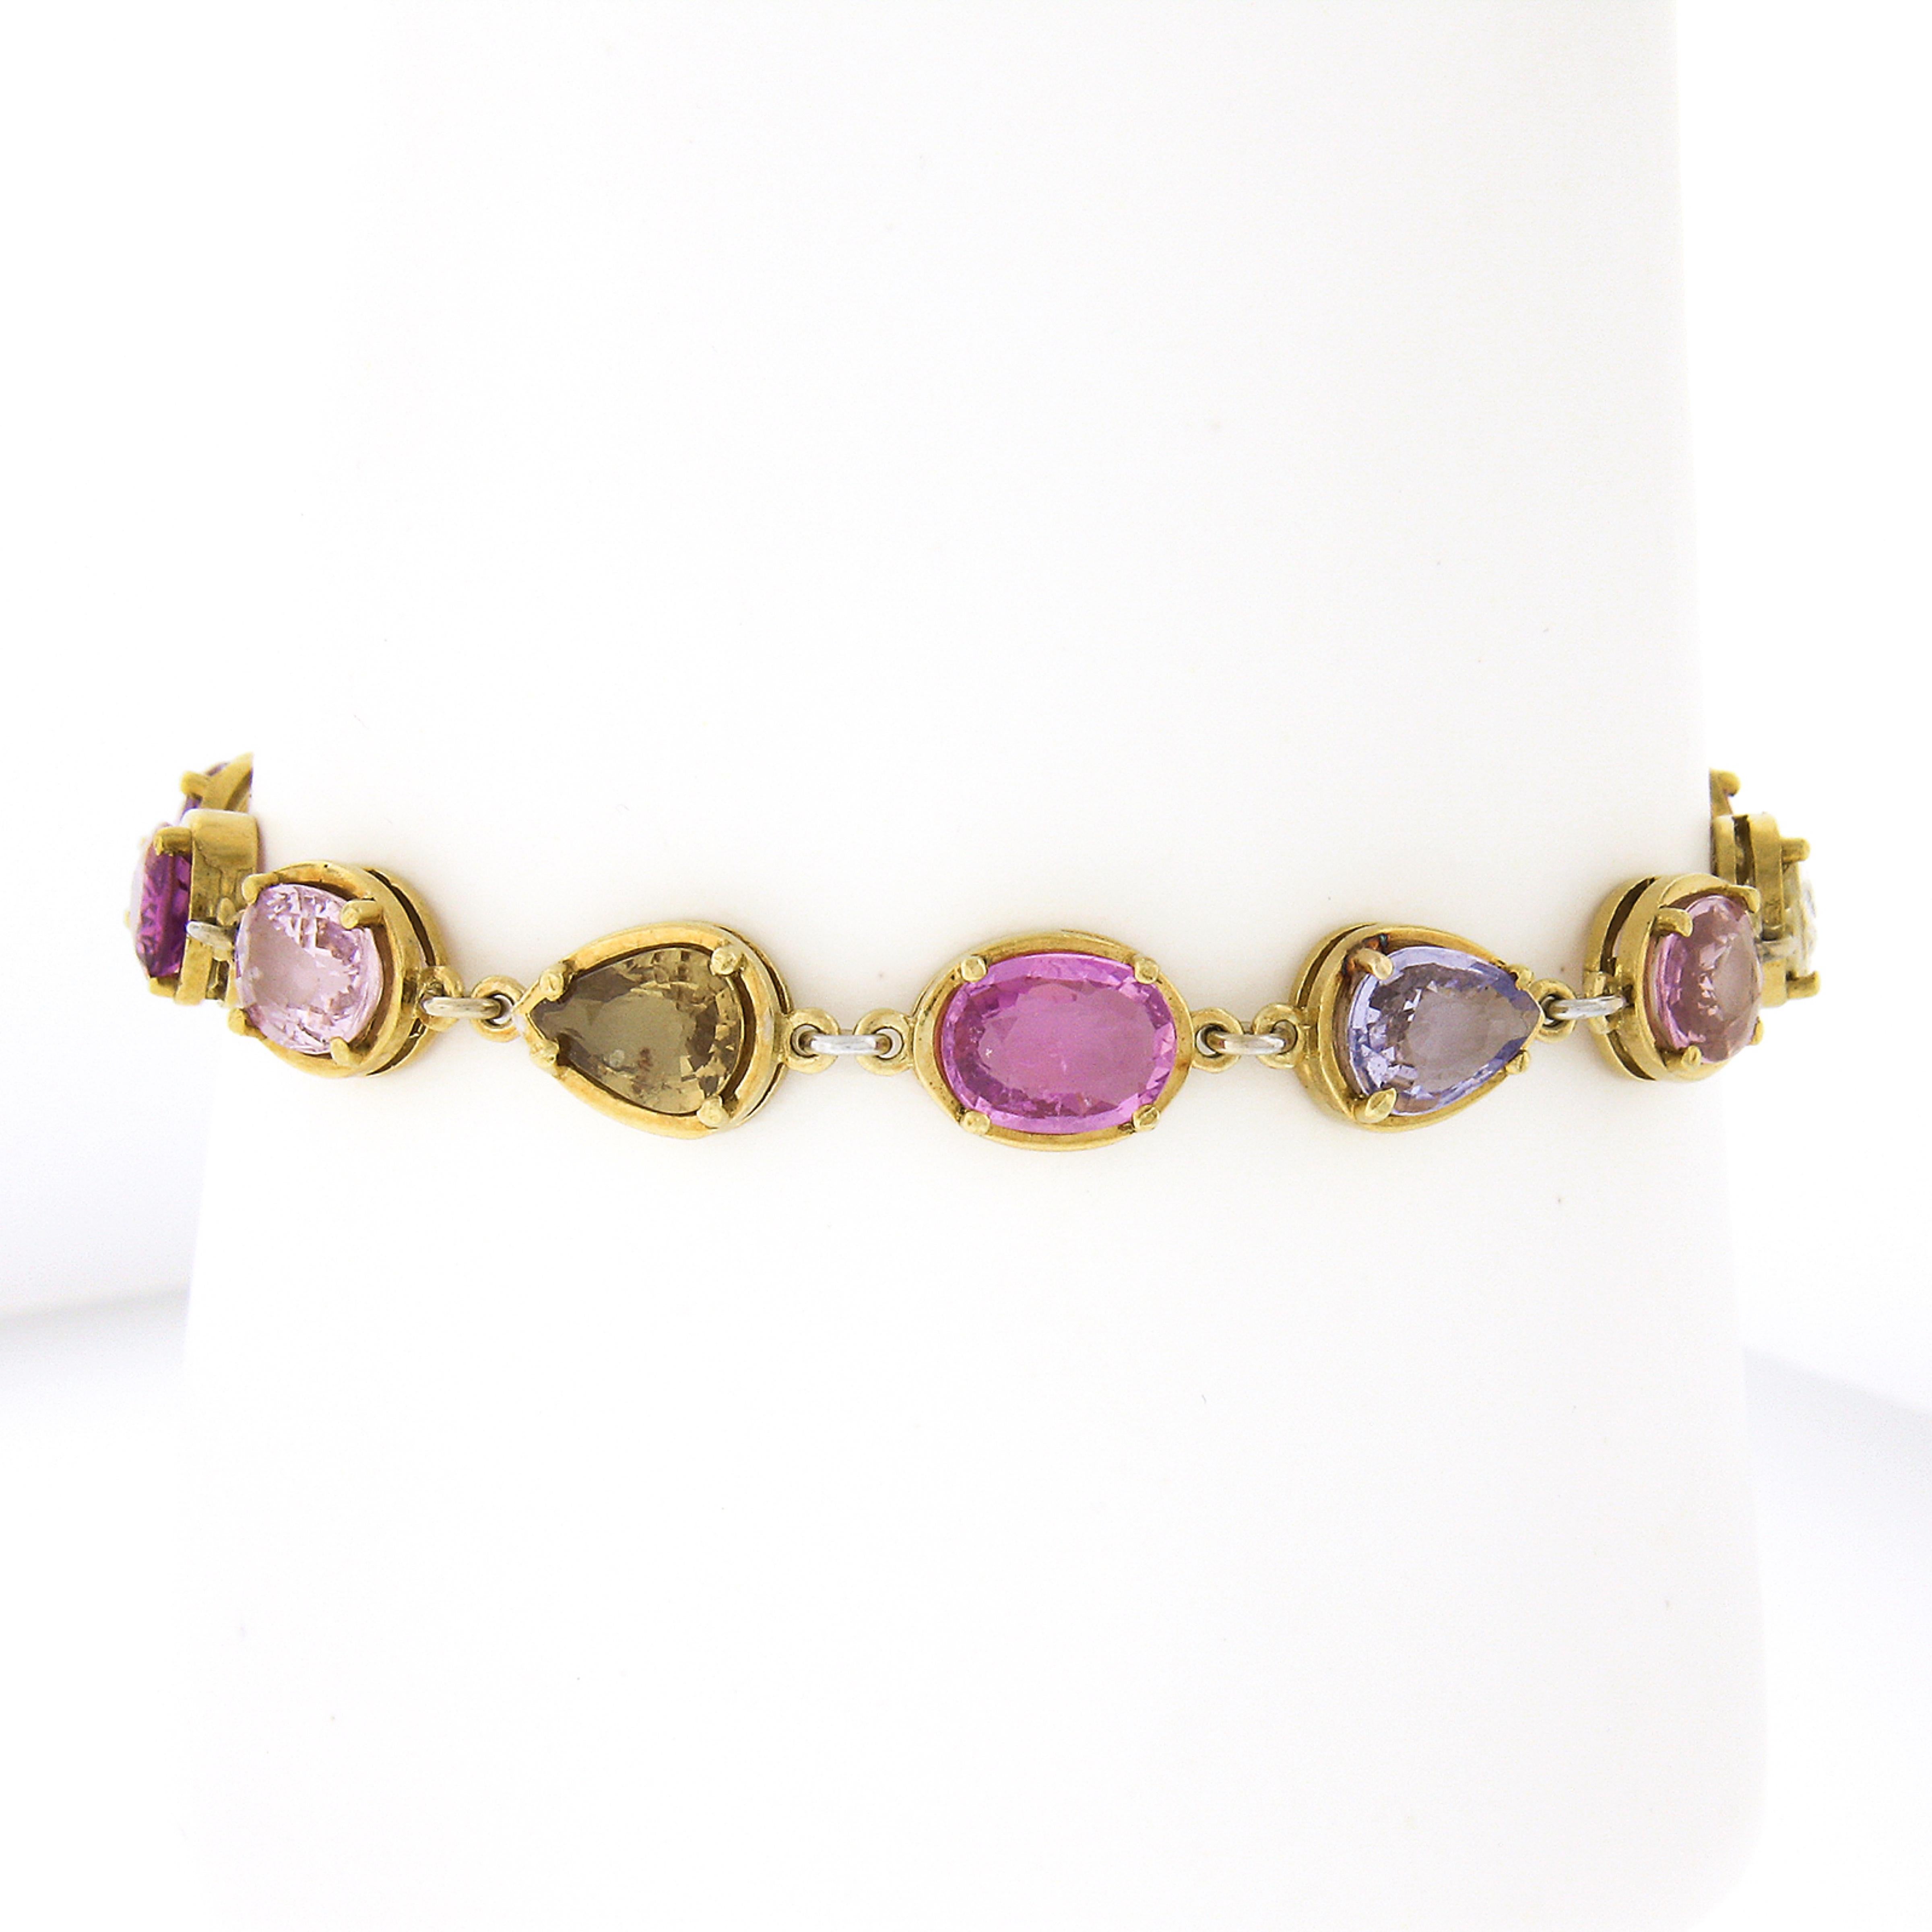 You are looking at an absolutely gorgeous vintage bracelet crafted from solid 18k yellow gold. Each of the 13 links is prong set with its own 100% natural sapphire stone of which three have been randomly selected for testing by GIA. These 13 stones